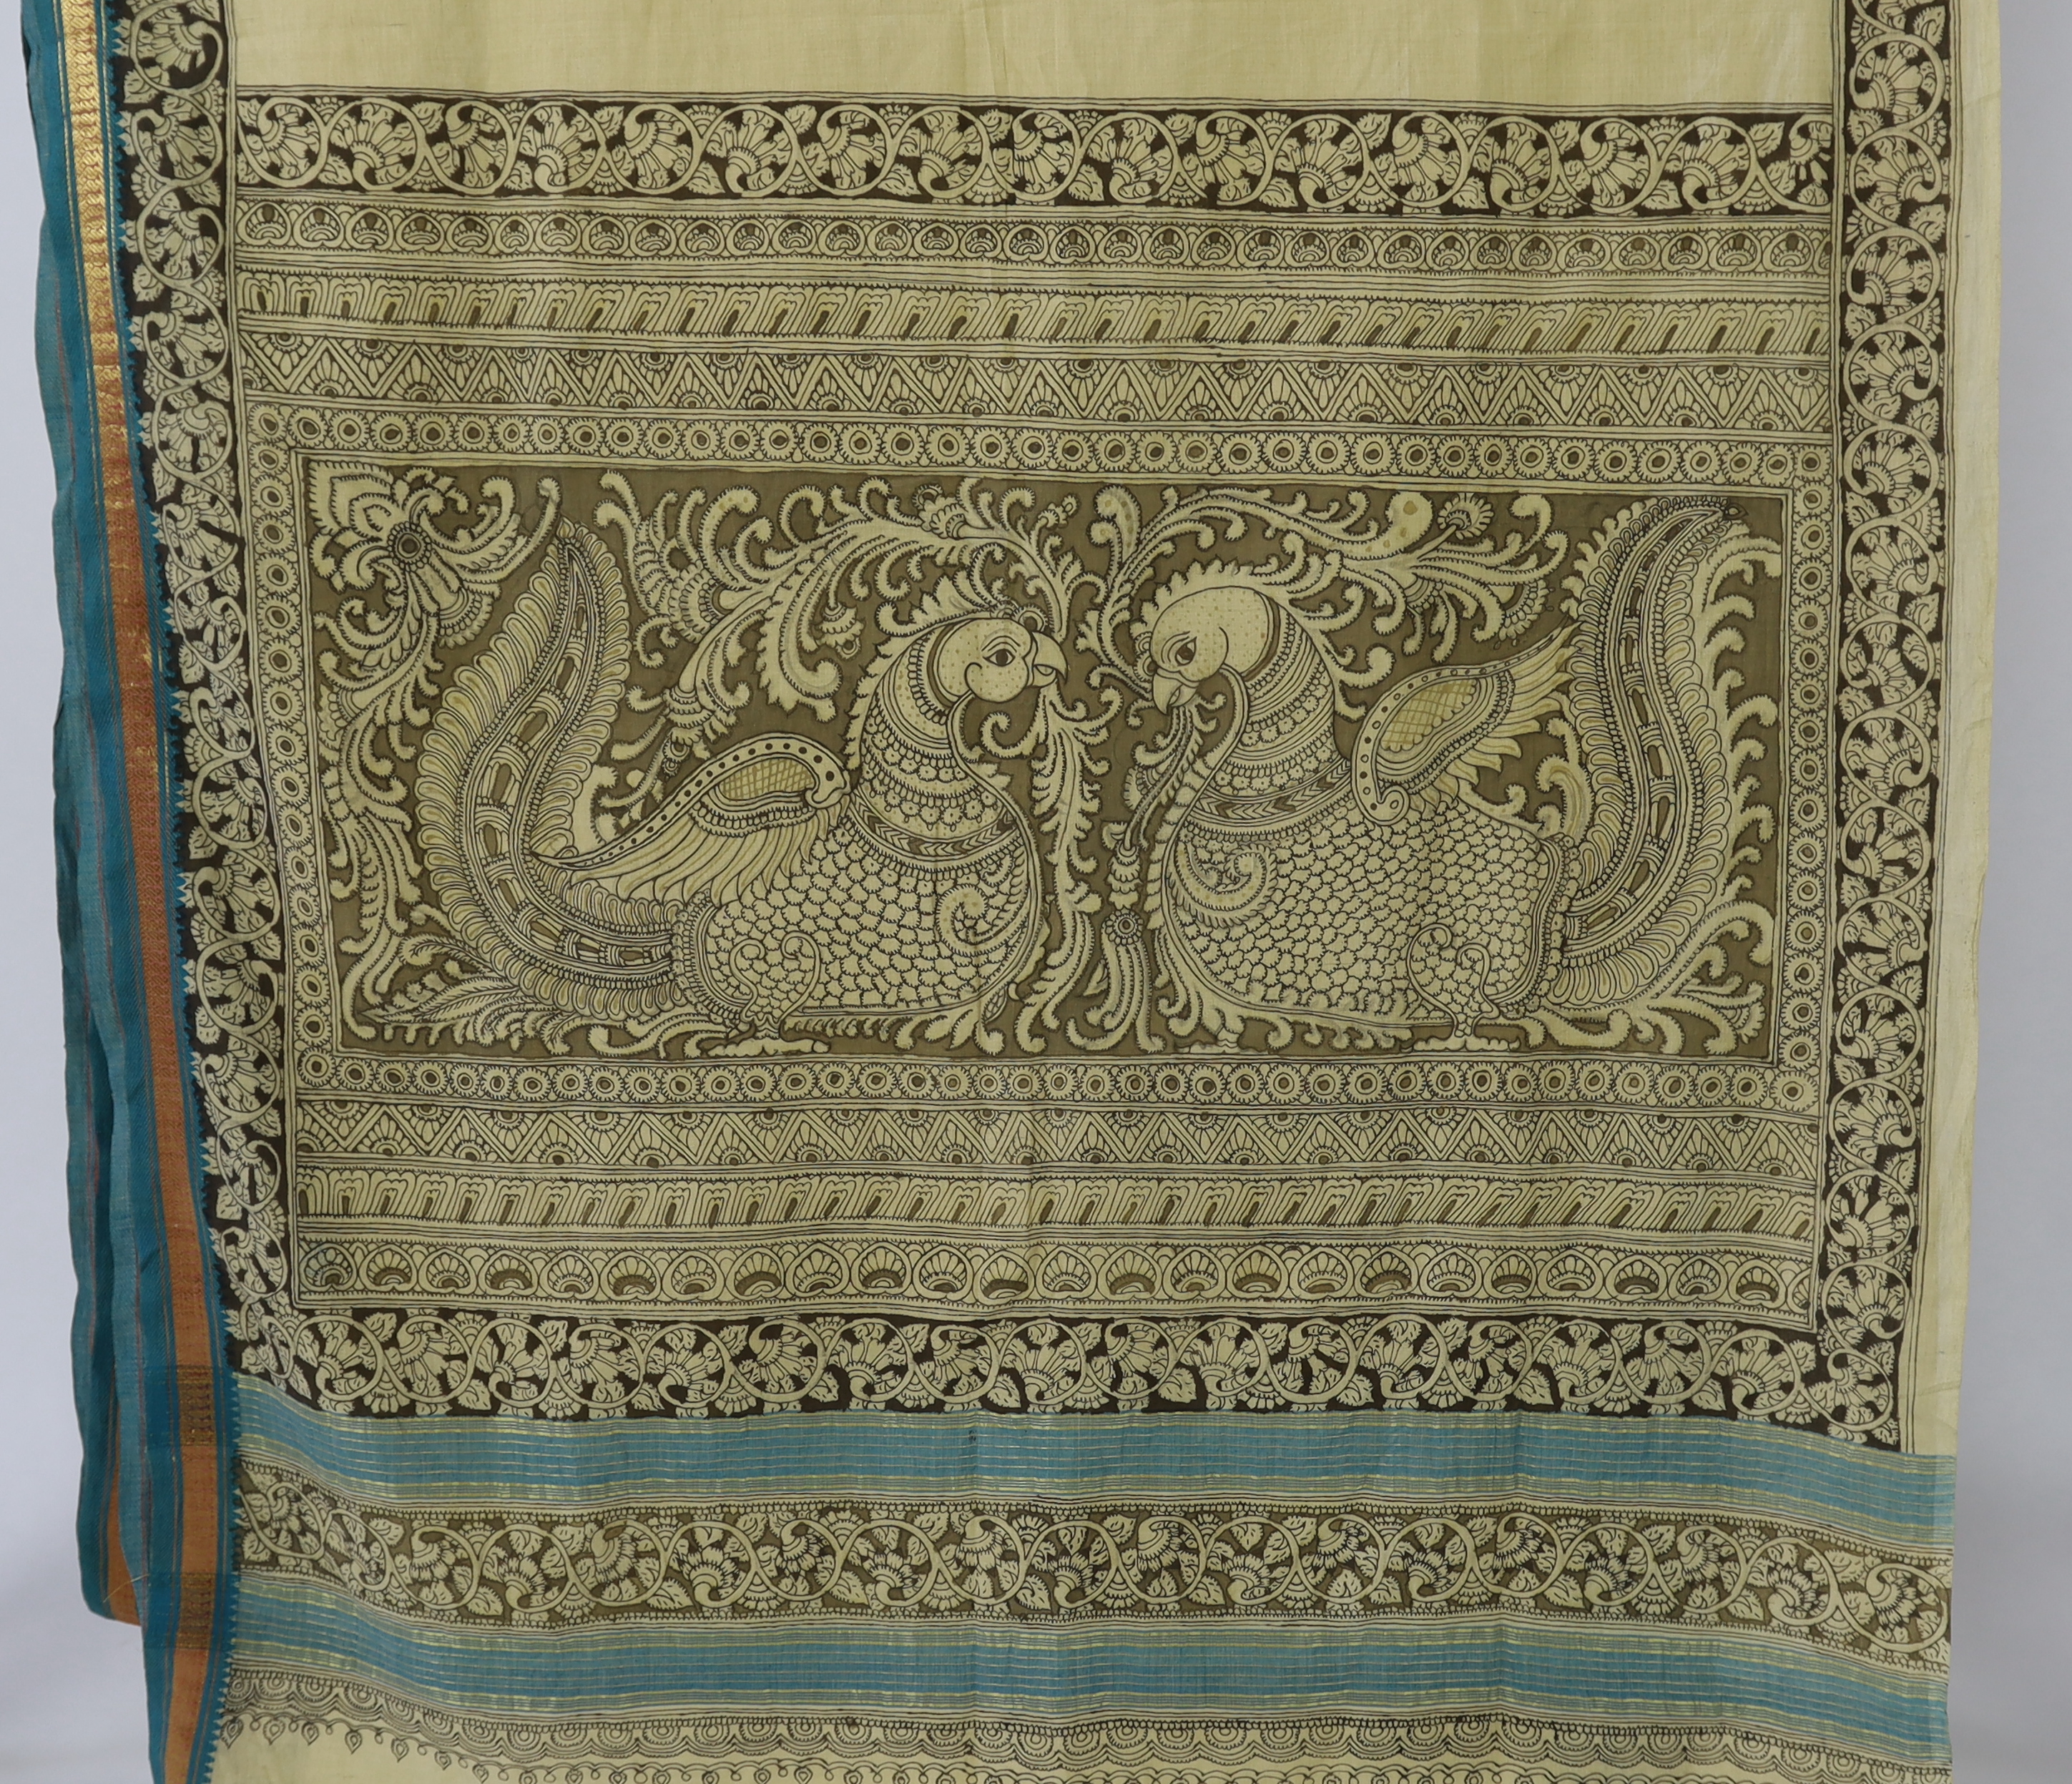 An Indian, Srikalahasti (north of Madras), 'Kalamkari' (penwork) sari, worked and designed by Krishna Reddy. This penwork design, chiefly used for huge temple hangings, is free drawn, with the fabric spread in the sun to